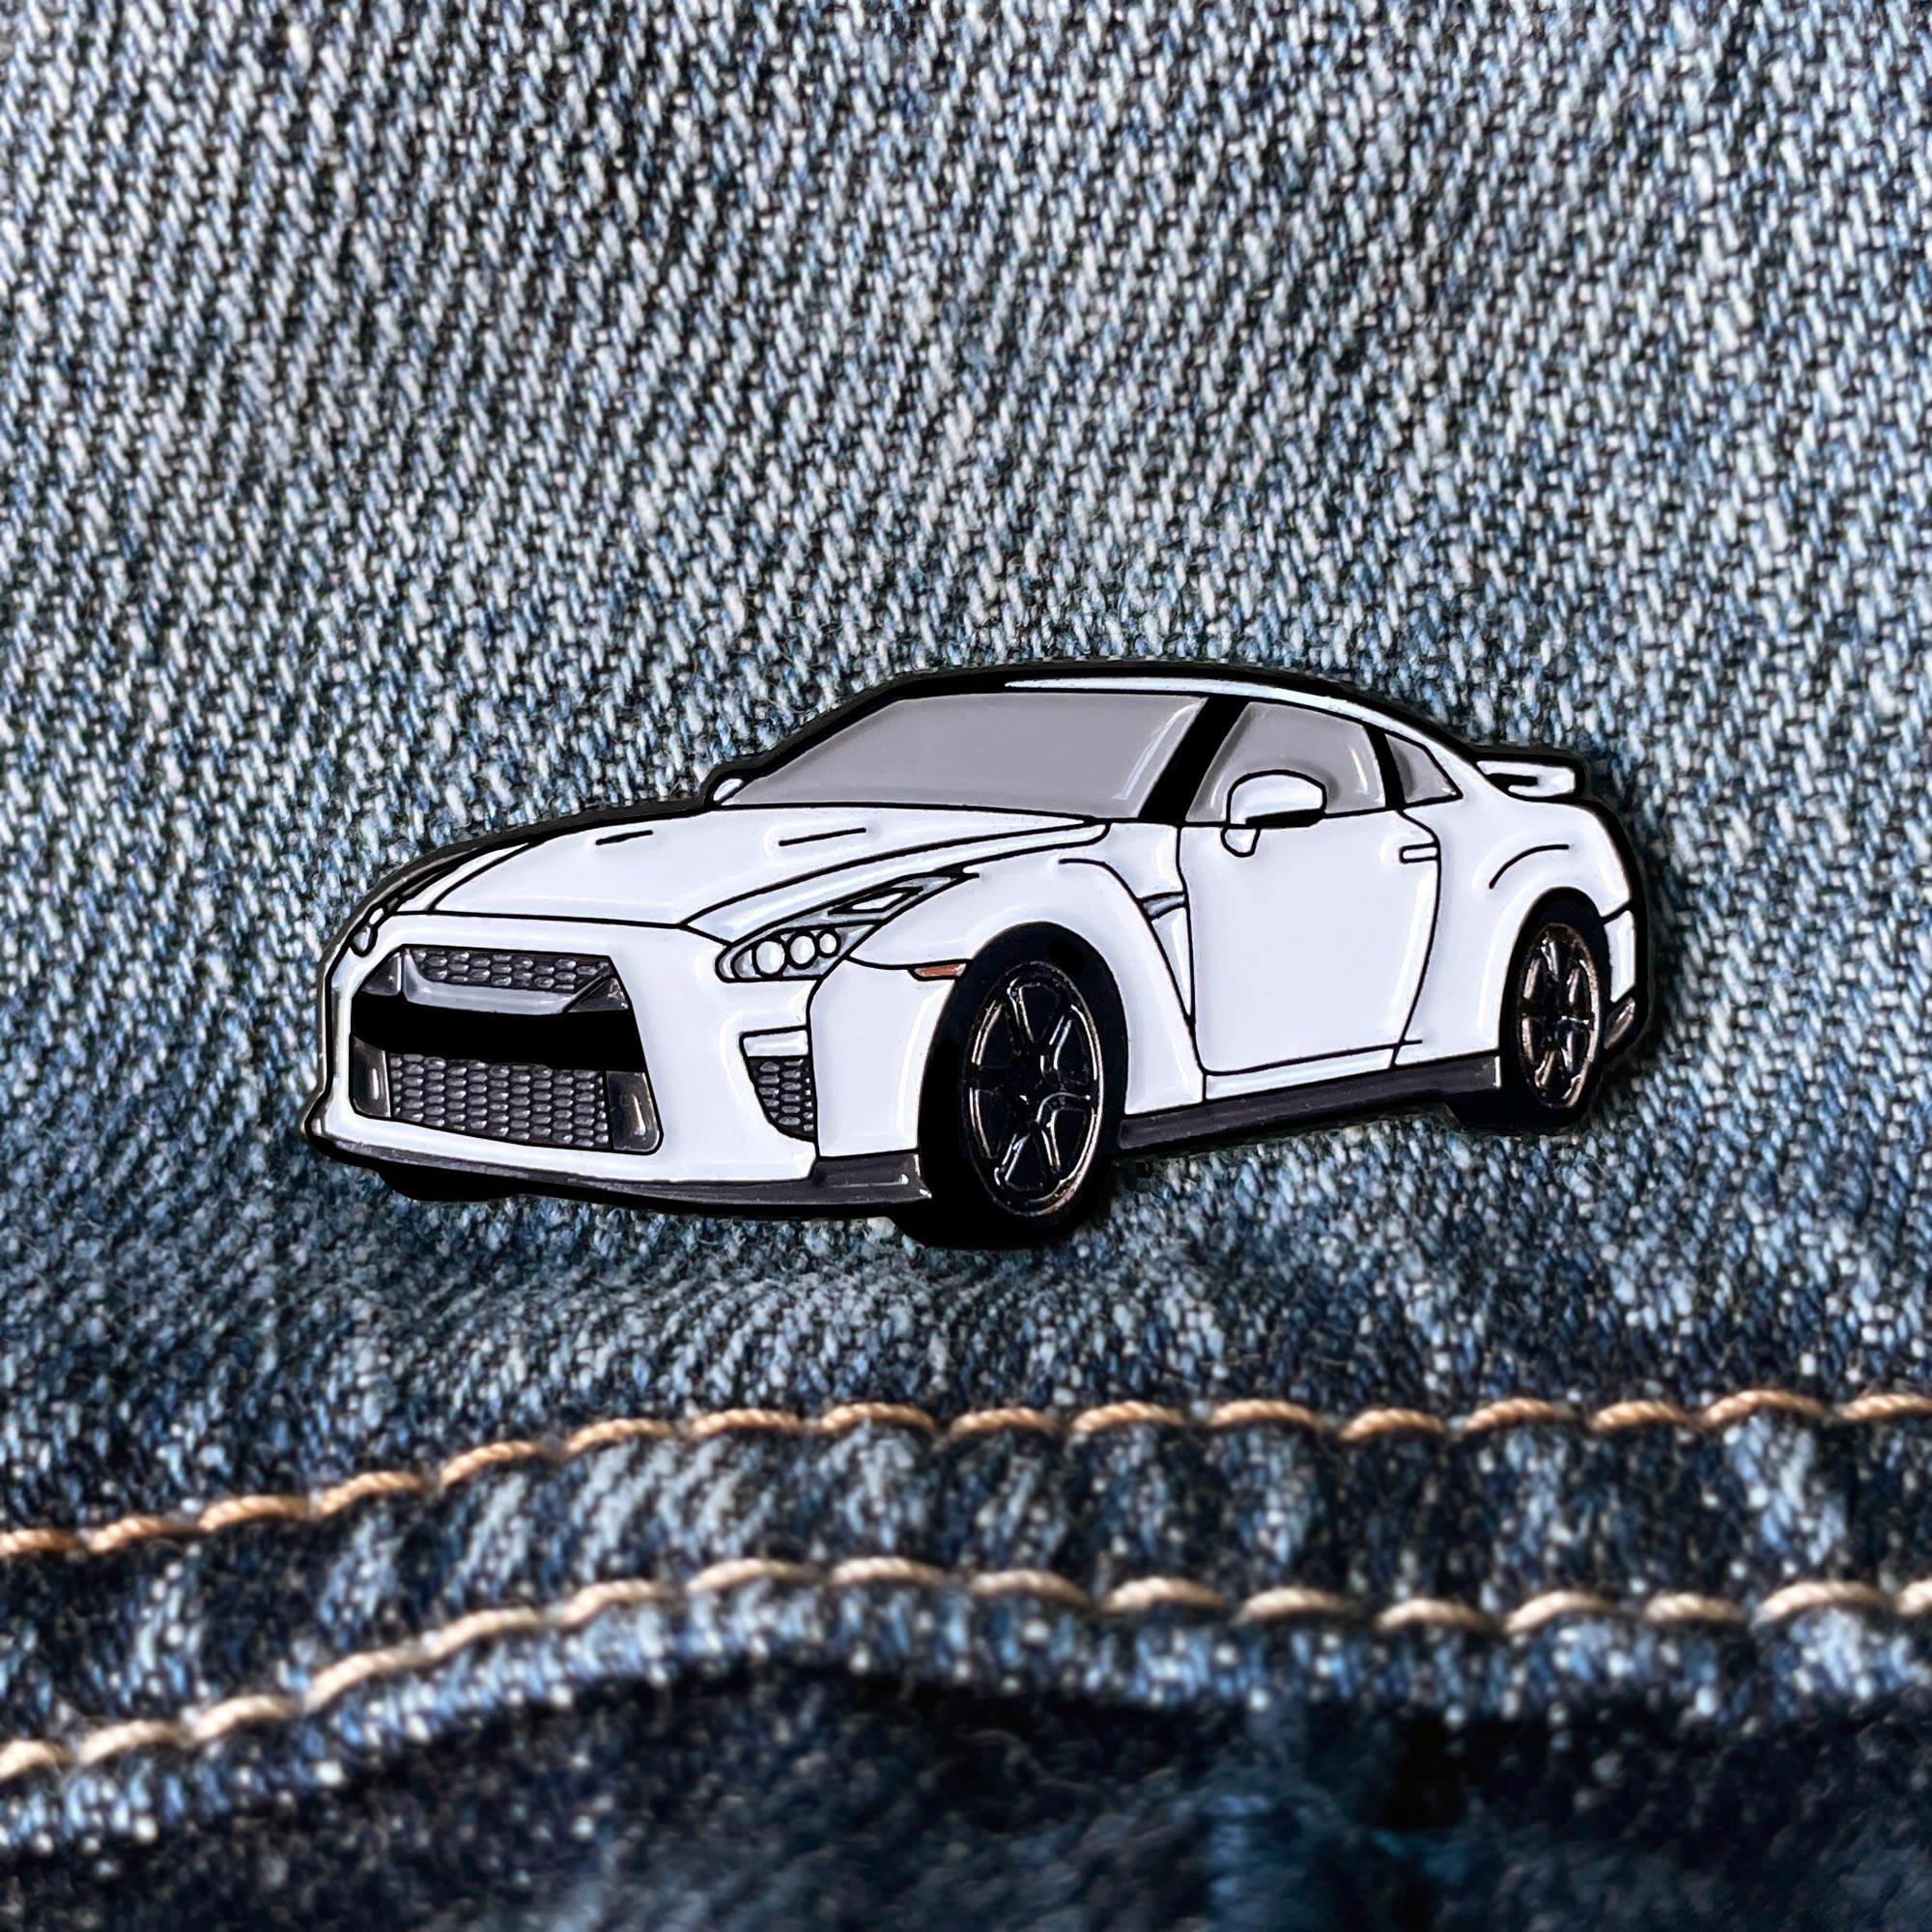 Enamel Pins - Cars – On Point Pins